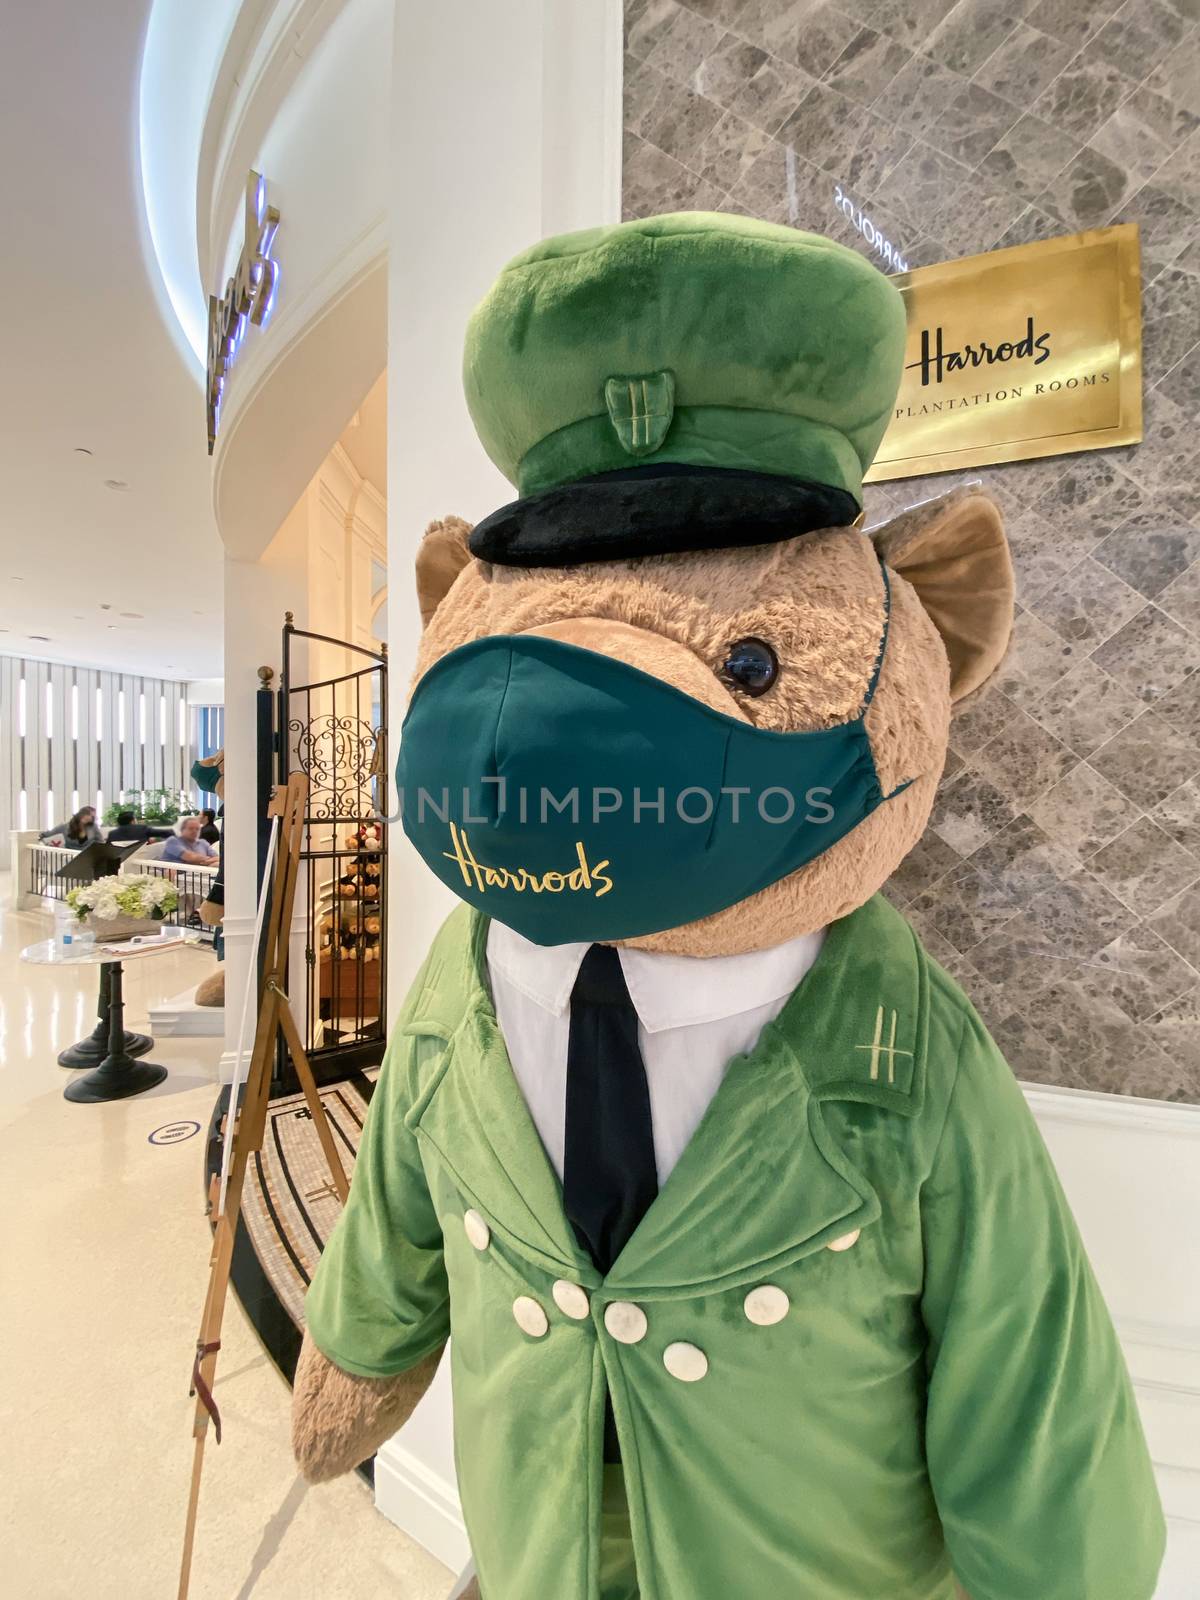 Harrods Teddy Bear (Greenman Bear) waring mask during Covid-19 pandemic at entrance of famous Harrods store in Central Embassy, Bangkok, Thailand